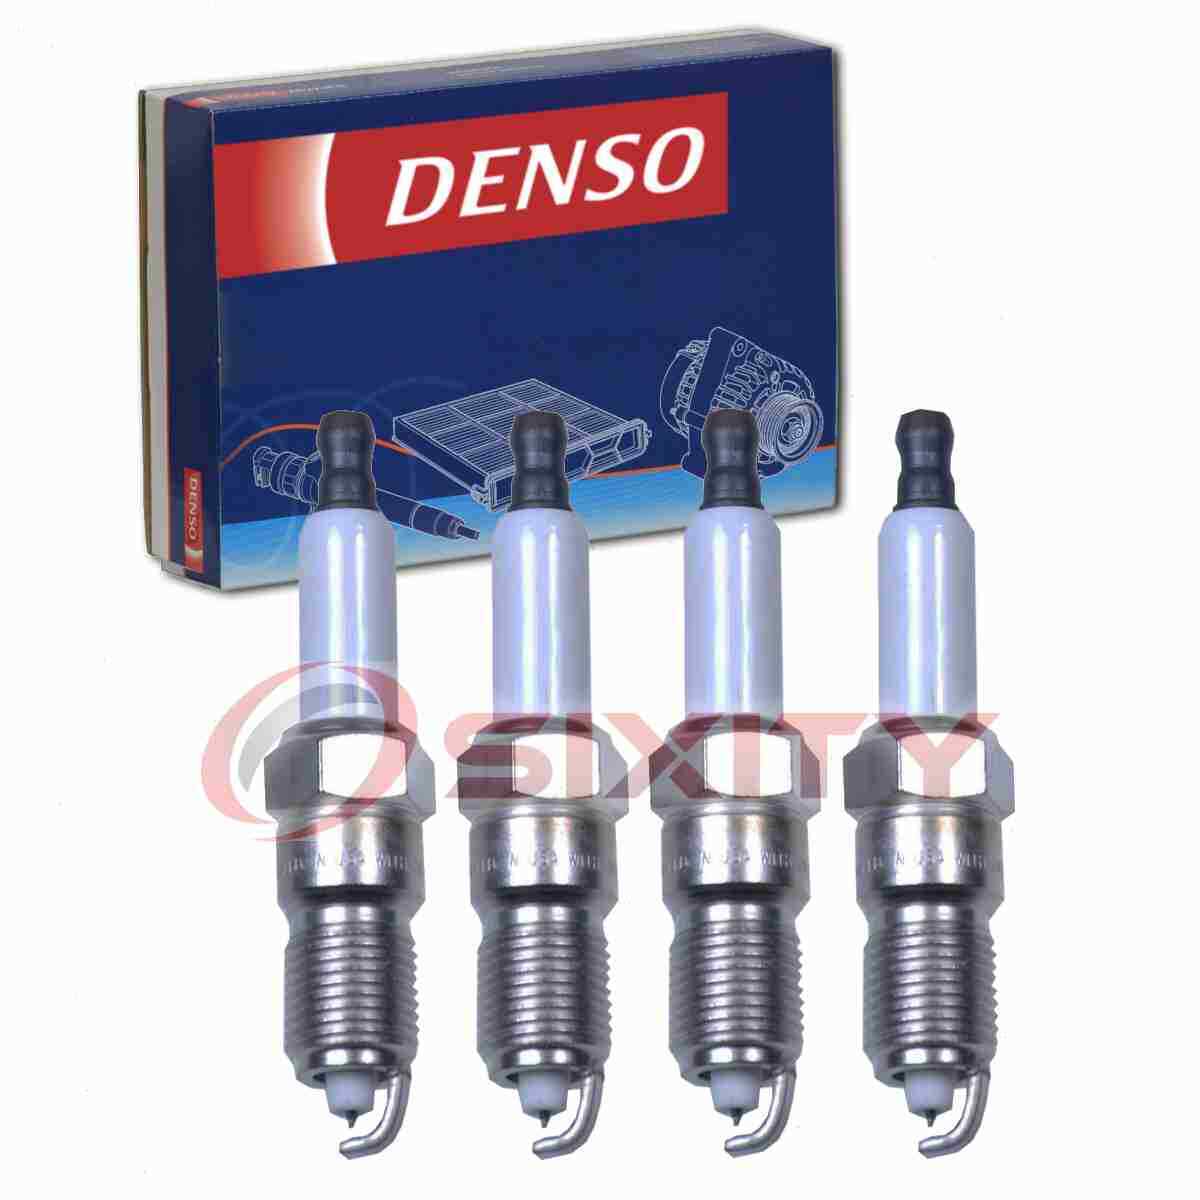 4 pc Denso Spark Plugs for 1994-1999 Mercury Tracer 1.9L 2.0L L4 Ignition ng